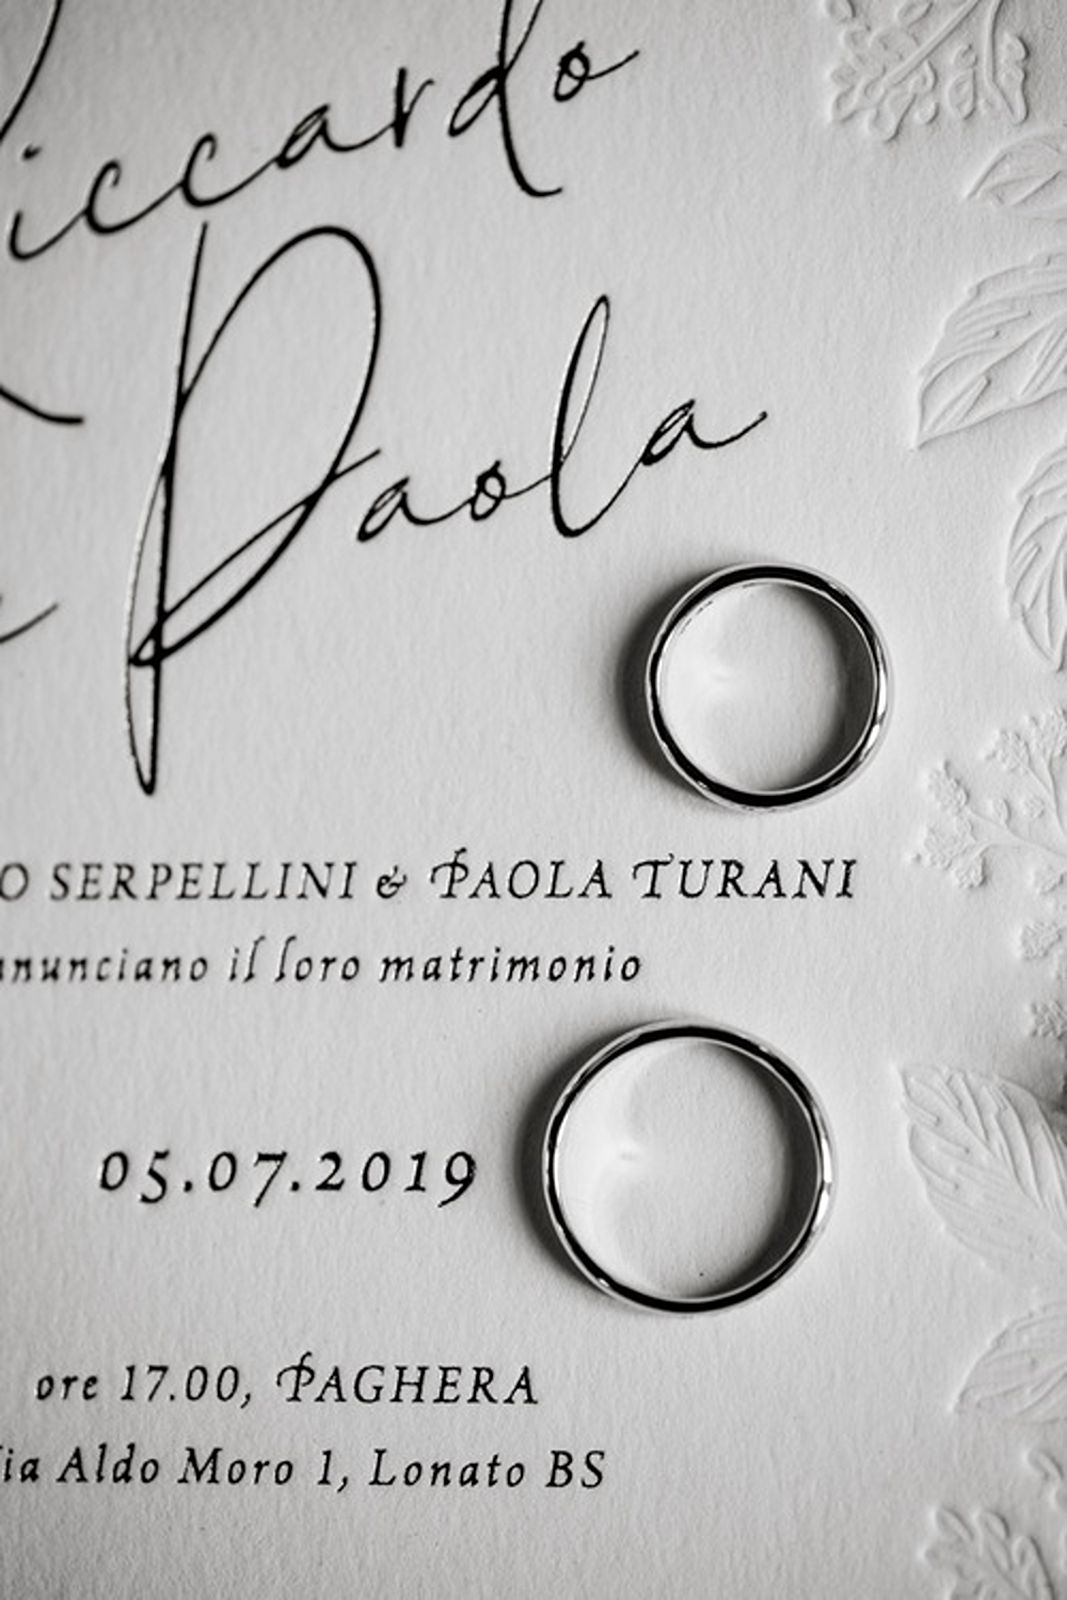 Two wedding bands rest on invitation card